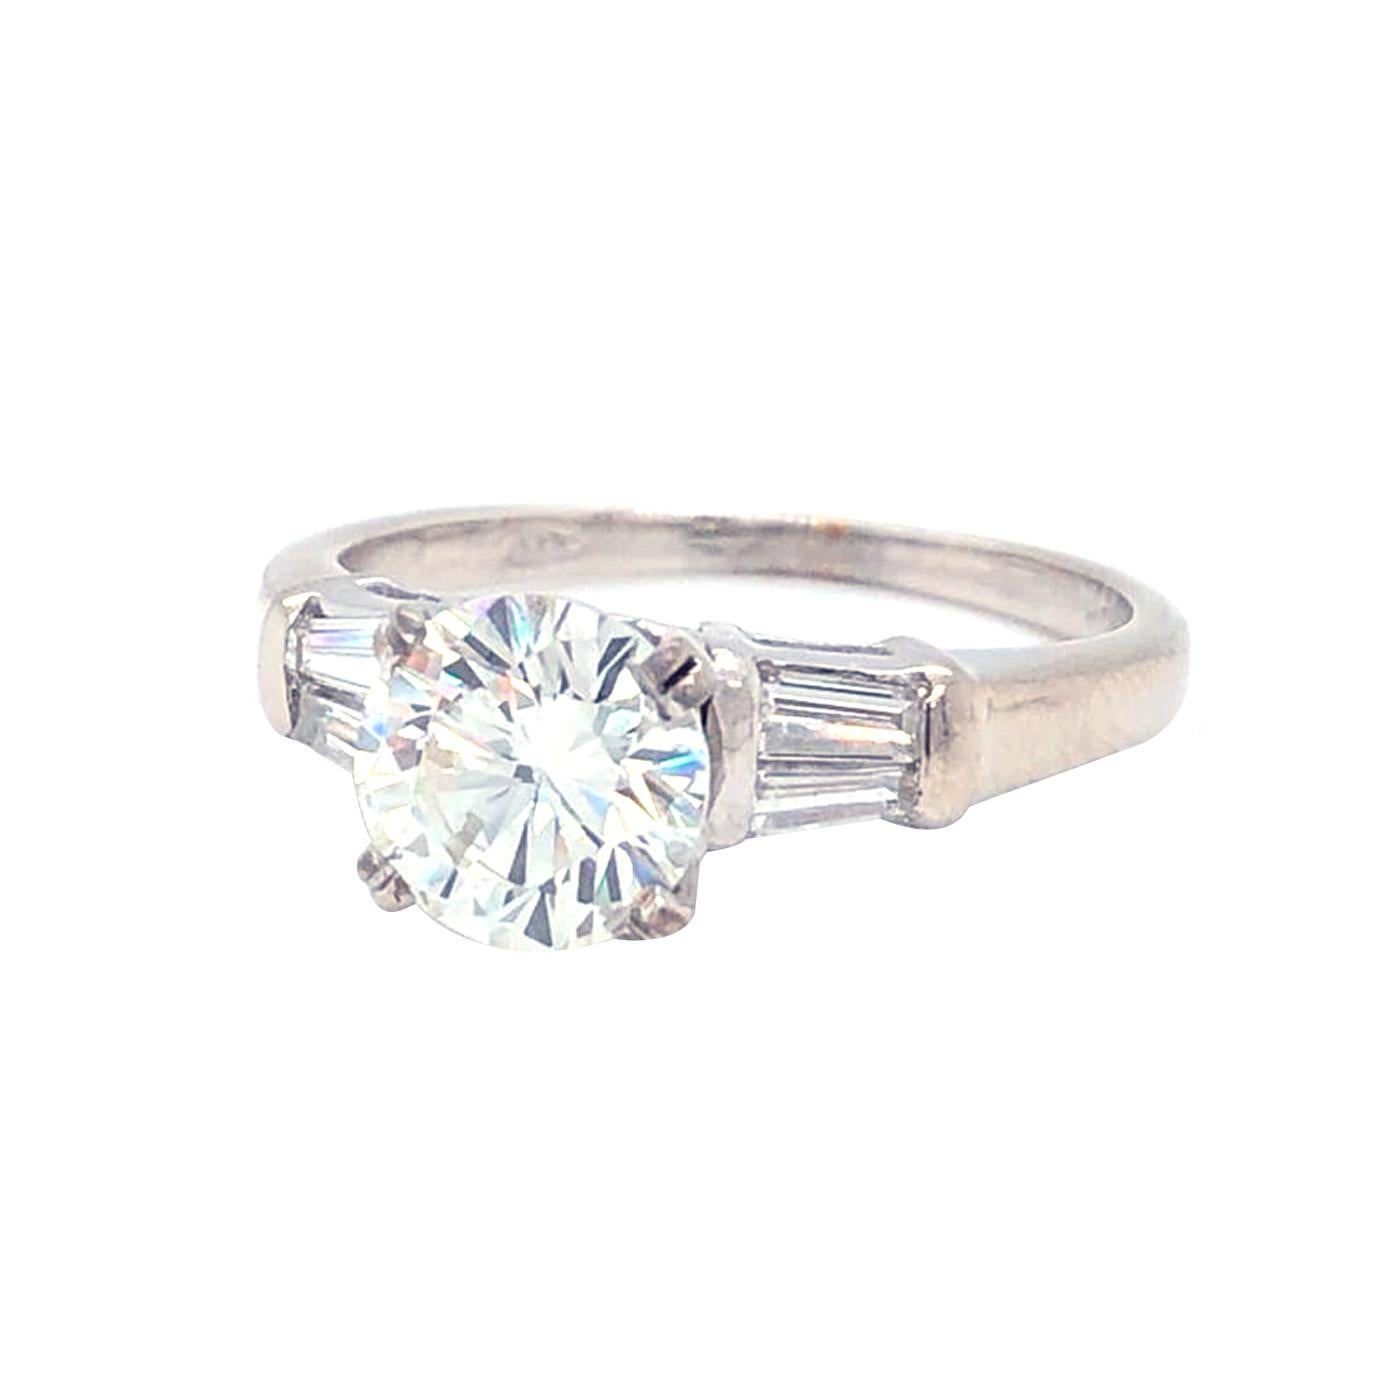 Classic Diamond ring 1.20 Carat center Round Brilliant Certified by Gia as K - Color, VS1  Clarity, and accented by two tapered baguette-cut diamonds, Totaling 0.30 carat H color, VS1 - Clarity, The ring weighs 3.00 grams, and is currently size 6,